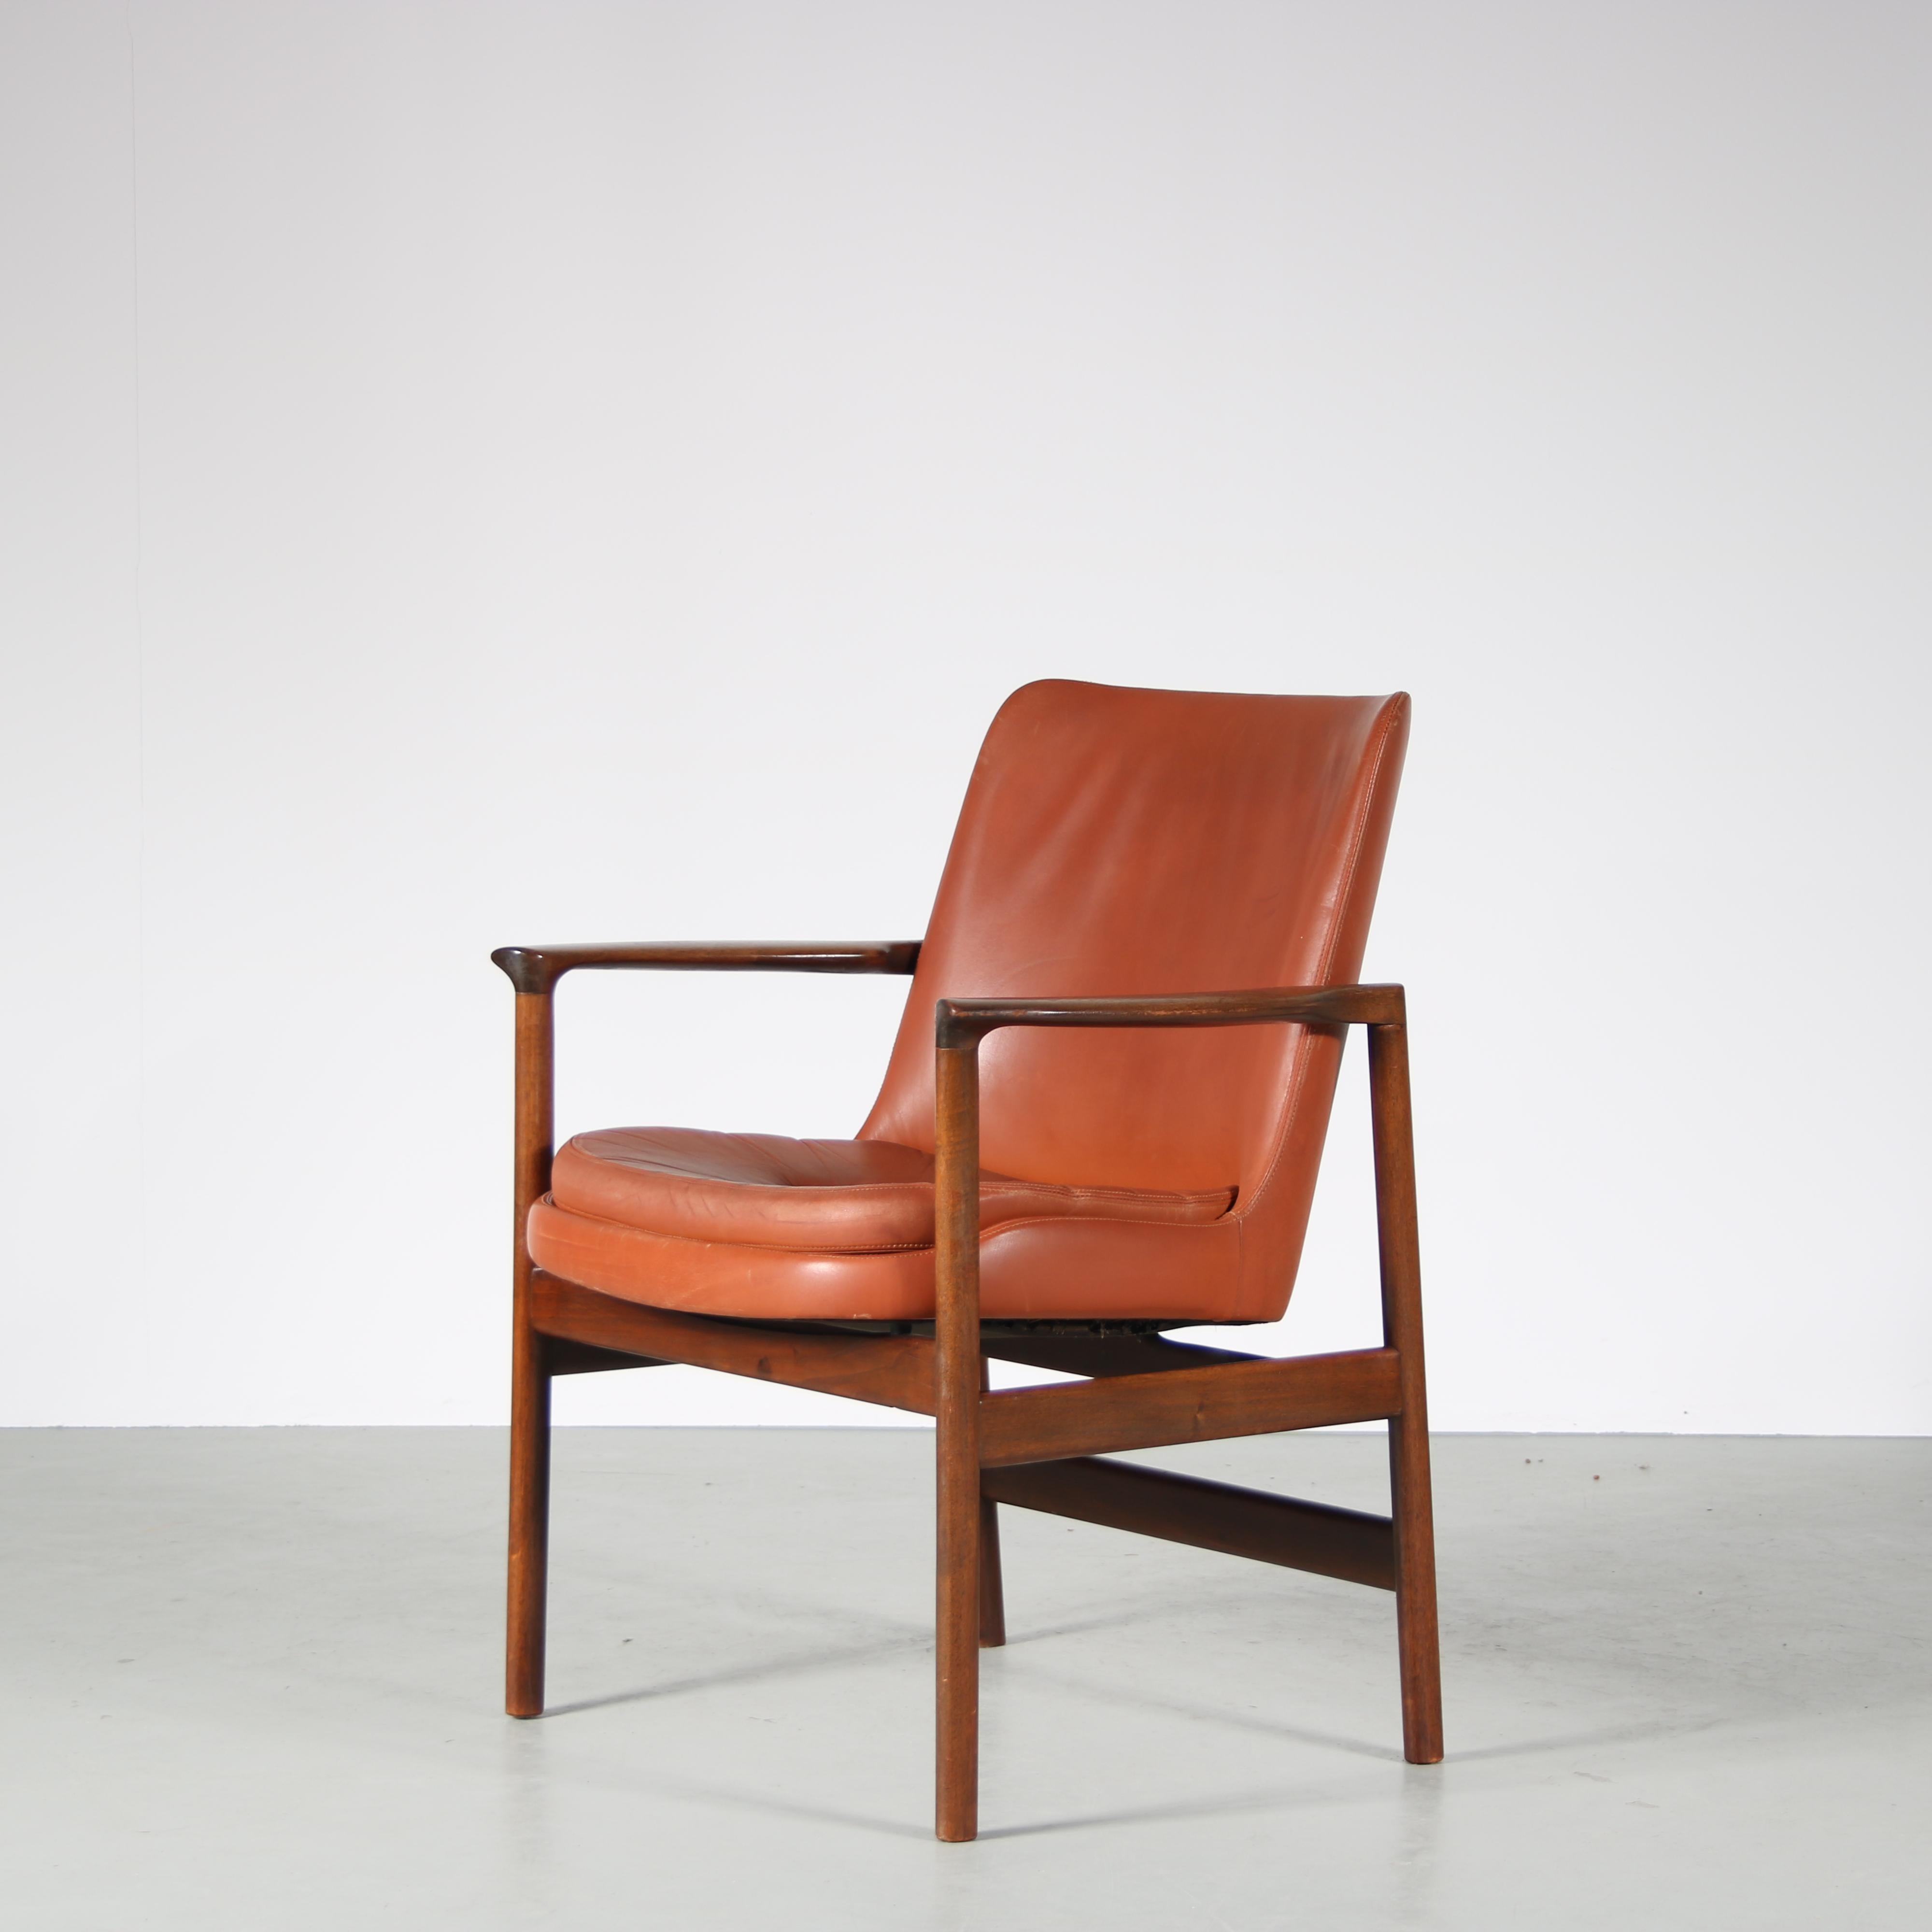 A beautiful side chair designed by Ib Kofod-Larsen for Fröschen Sitform in Germany around 1960.

Made of high quality walnut wood with cognac leather, this is a highly recognizable piece by iconic design Ib Kofod Larsen. The warm brown colour of